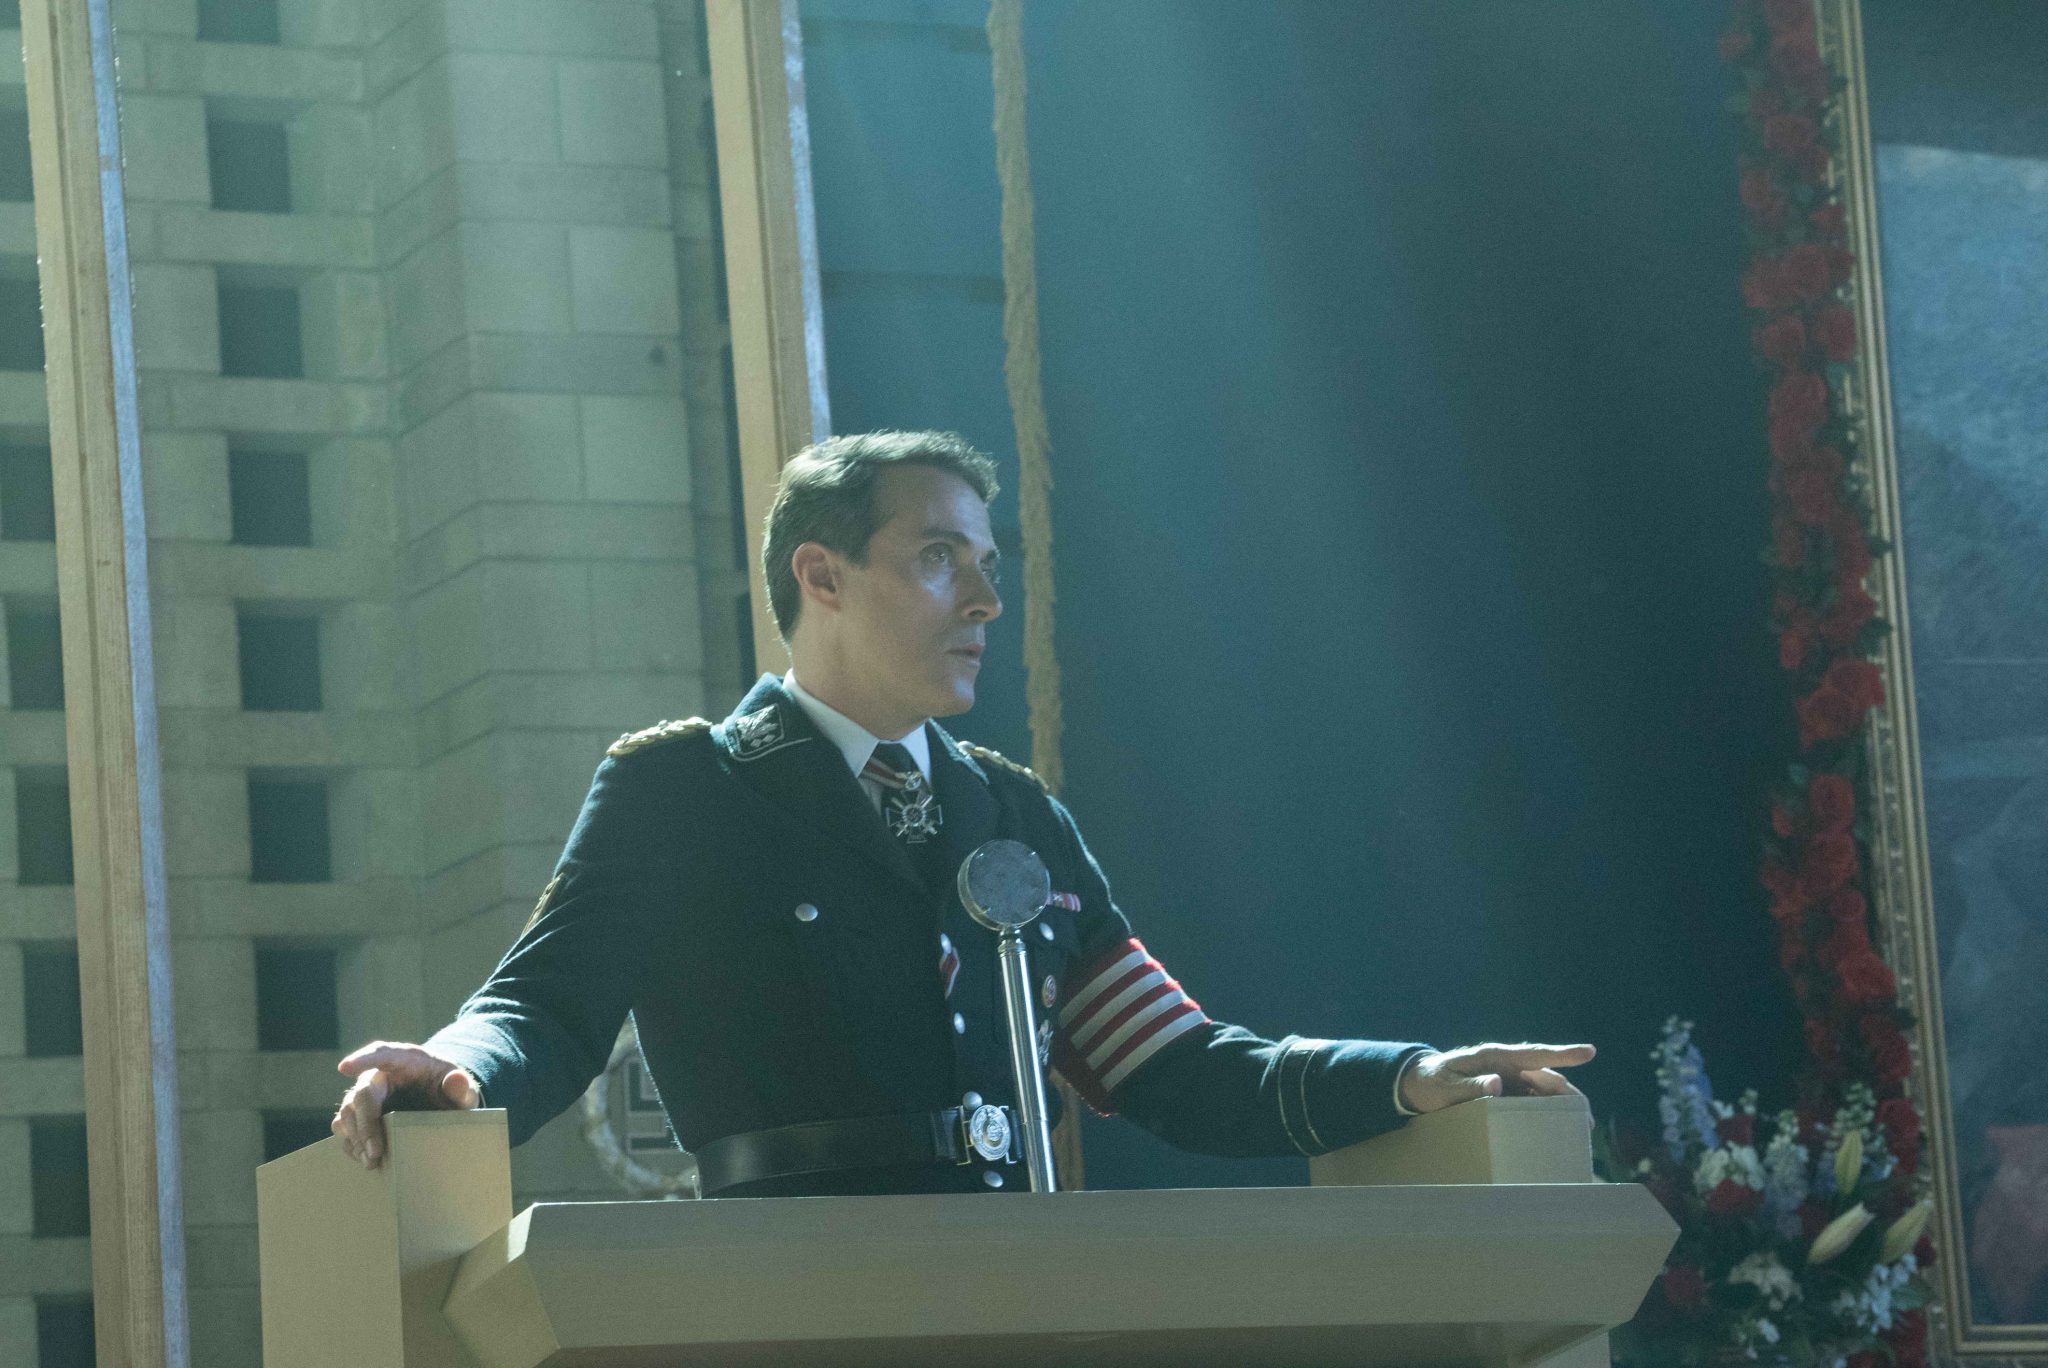 Rufus Sewell as Obergruppenführer John Smith in The Man in the High Castle: Season 2. Photo Credit: Liane Hentscher/Amazon Prime Video